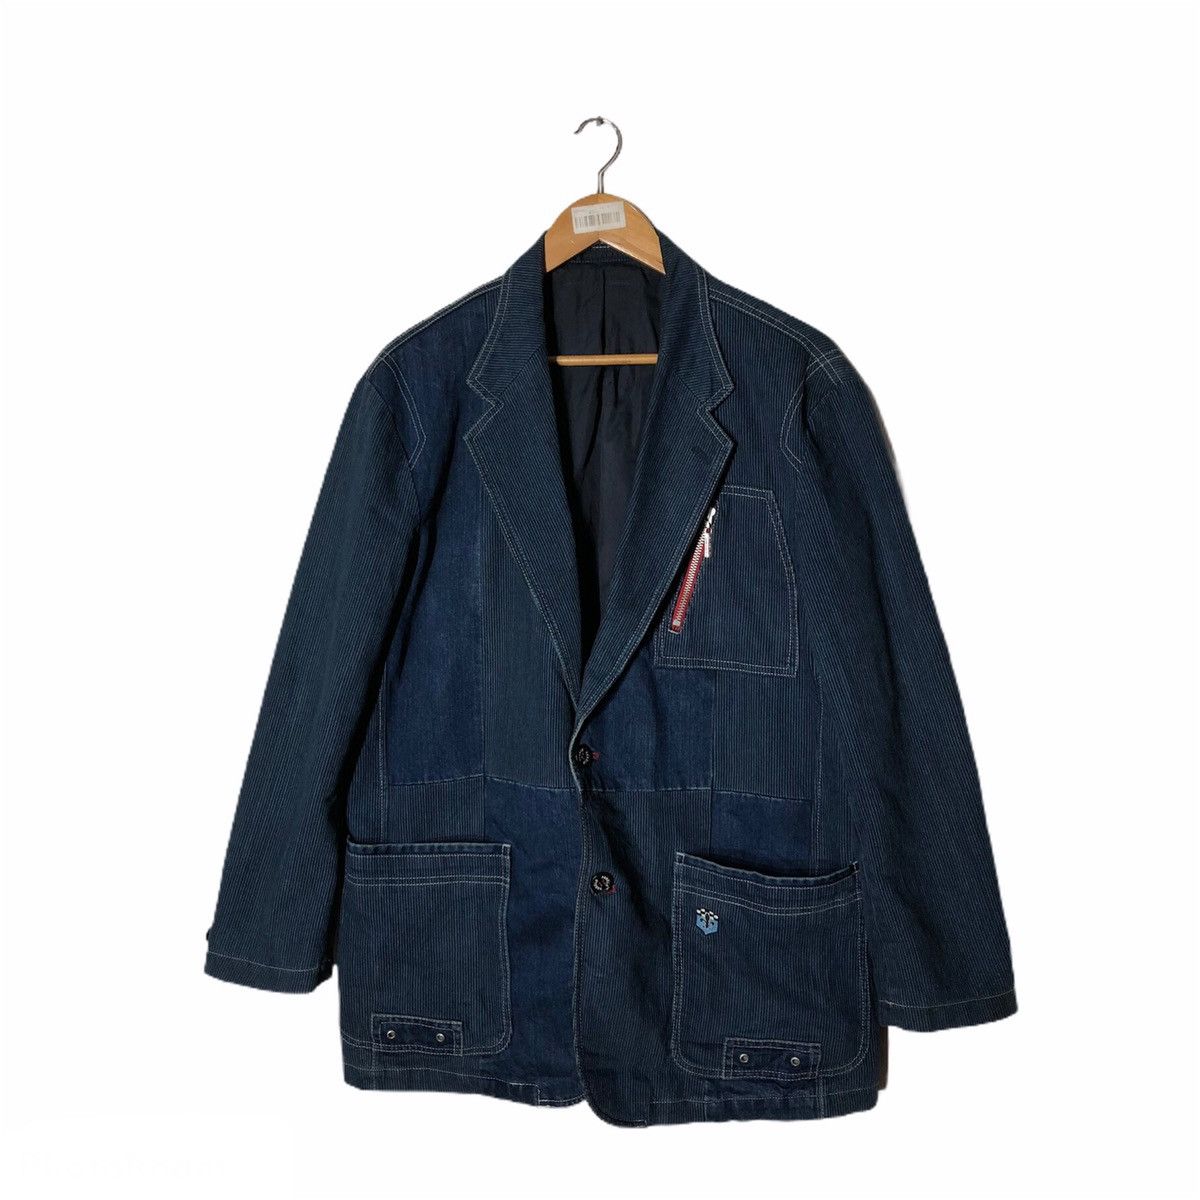 Japanese Brand PAGELO PATCHWORK CHORE JACKET INSPIRED BY KAPITAL JAPAN ...